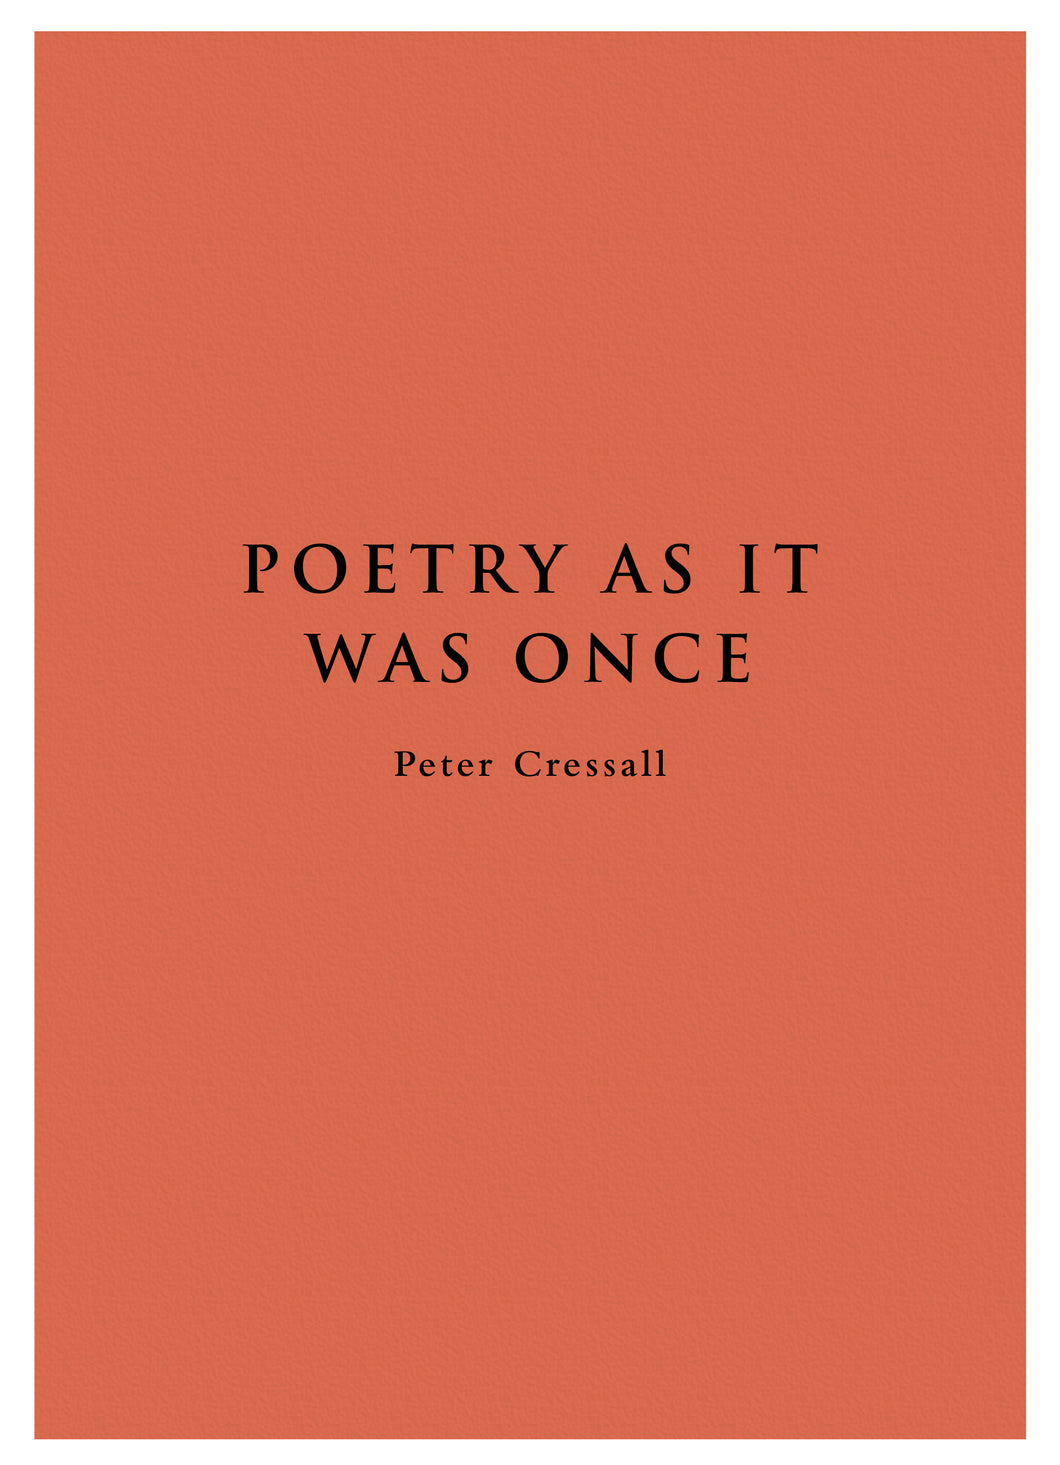 Poetry As It Once Was - Peter Cressall